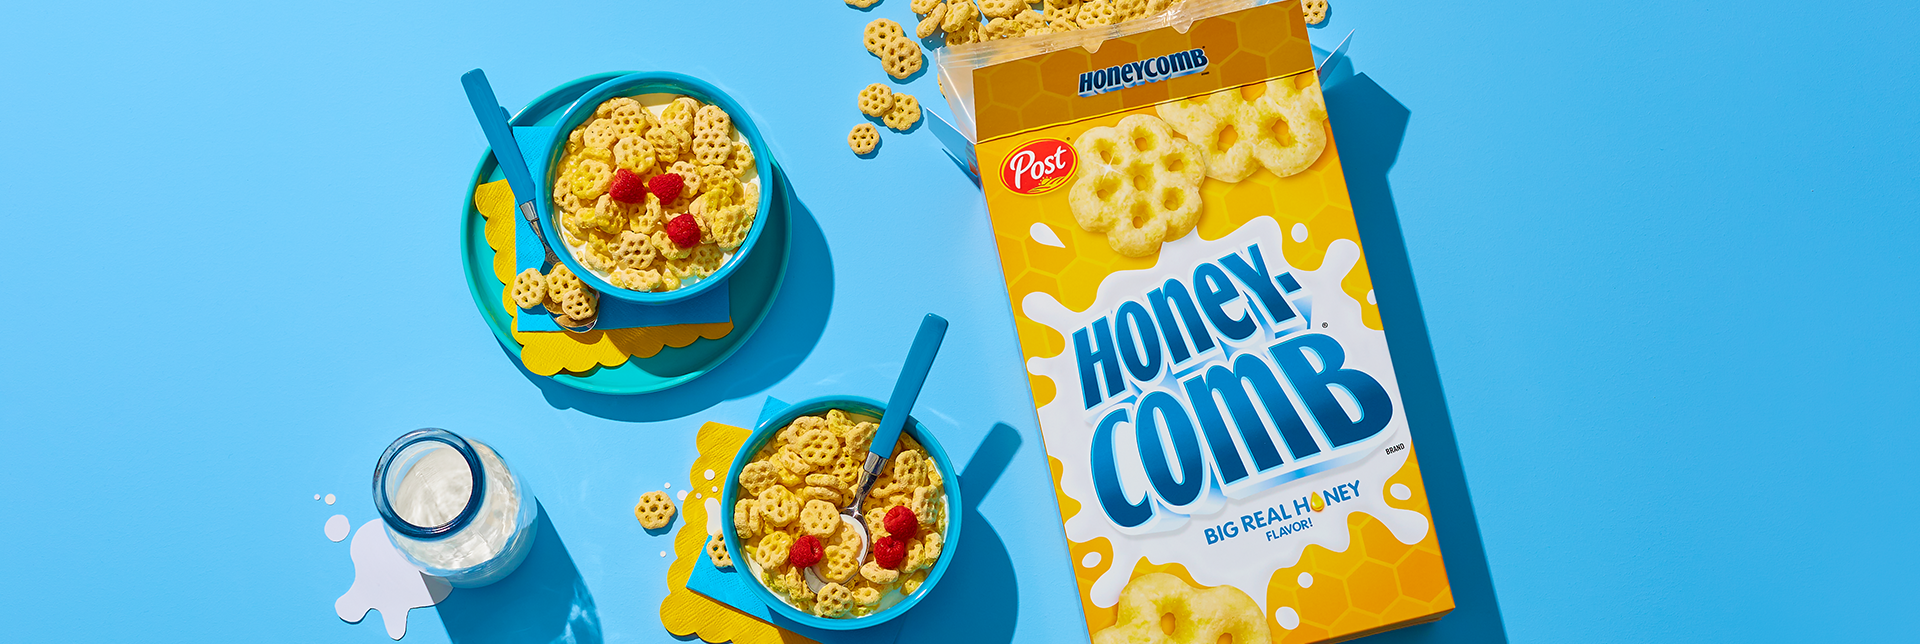 Honeycomb cereal box and bowls with milk